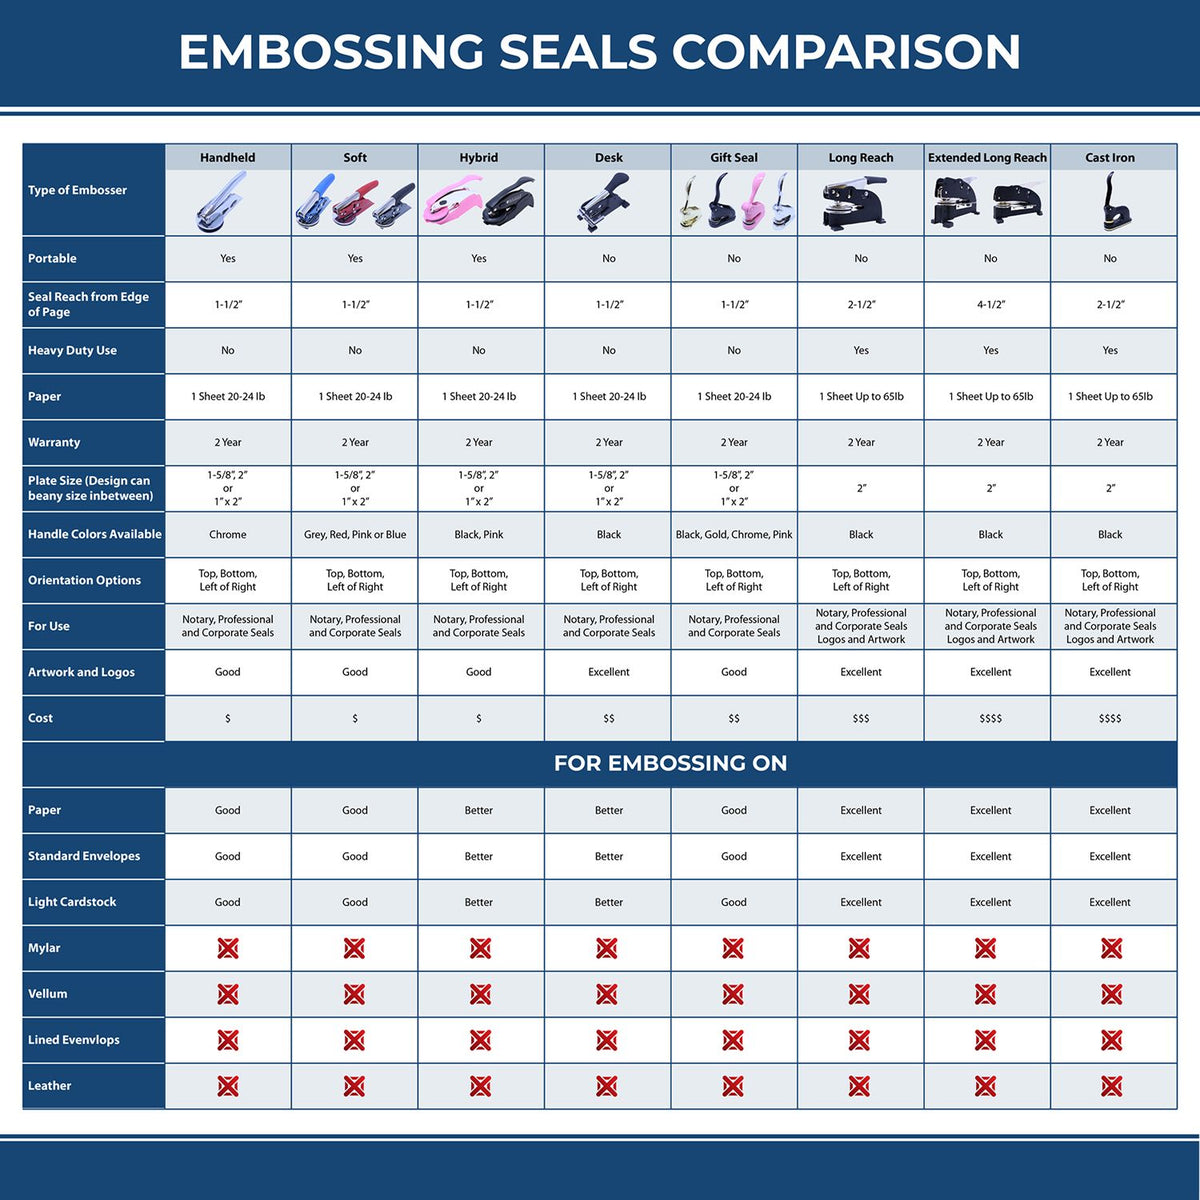 A comparison chart for the different types of mount models available for the Hybrid North Dakota Architect Seal